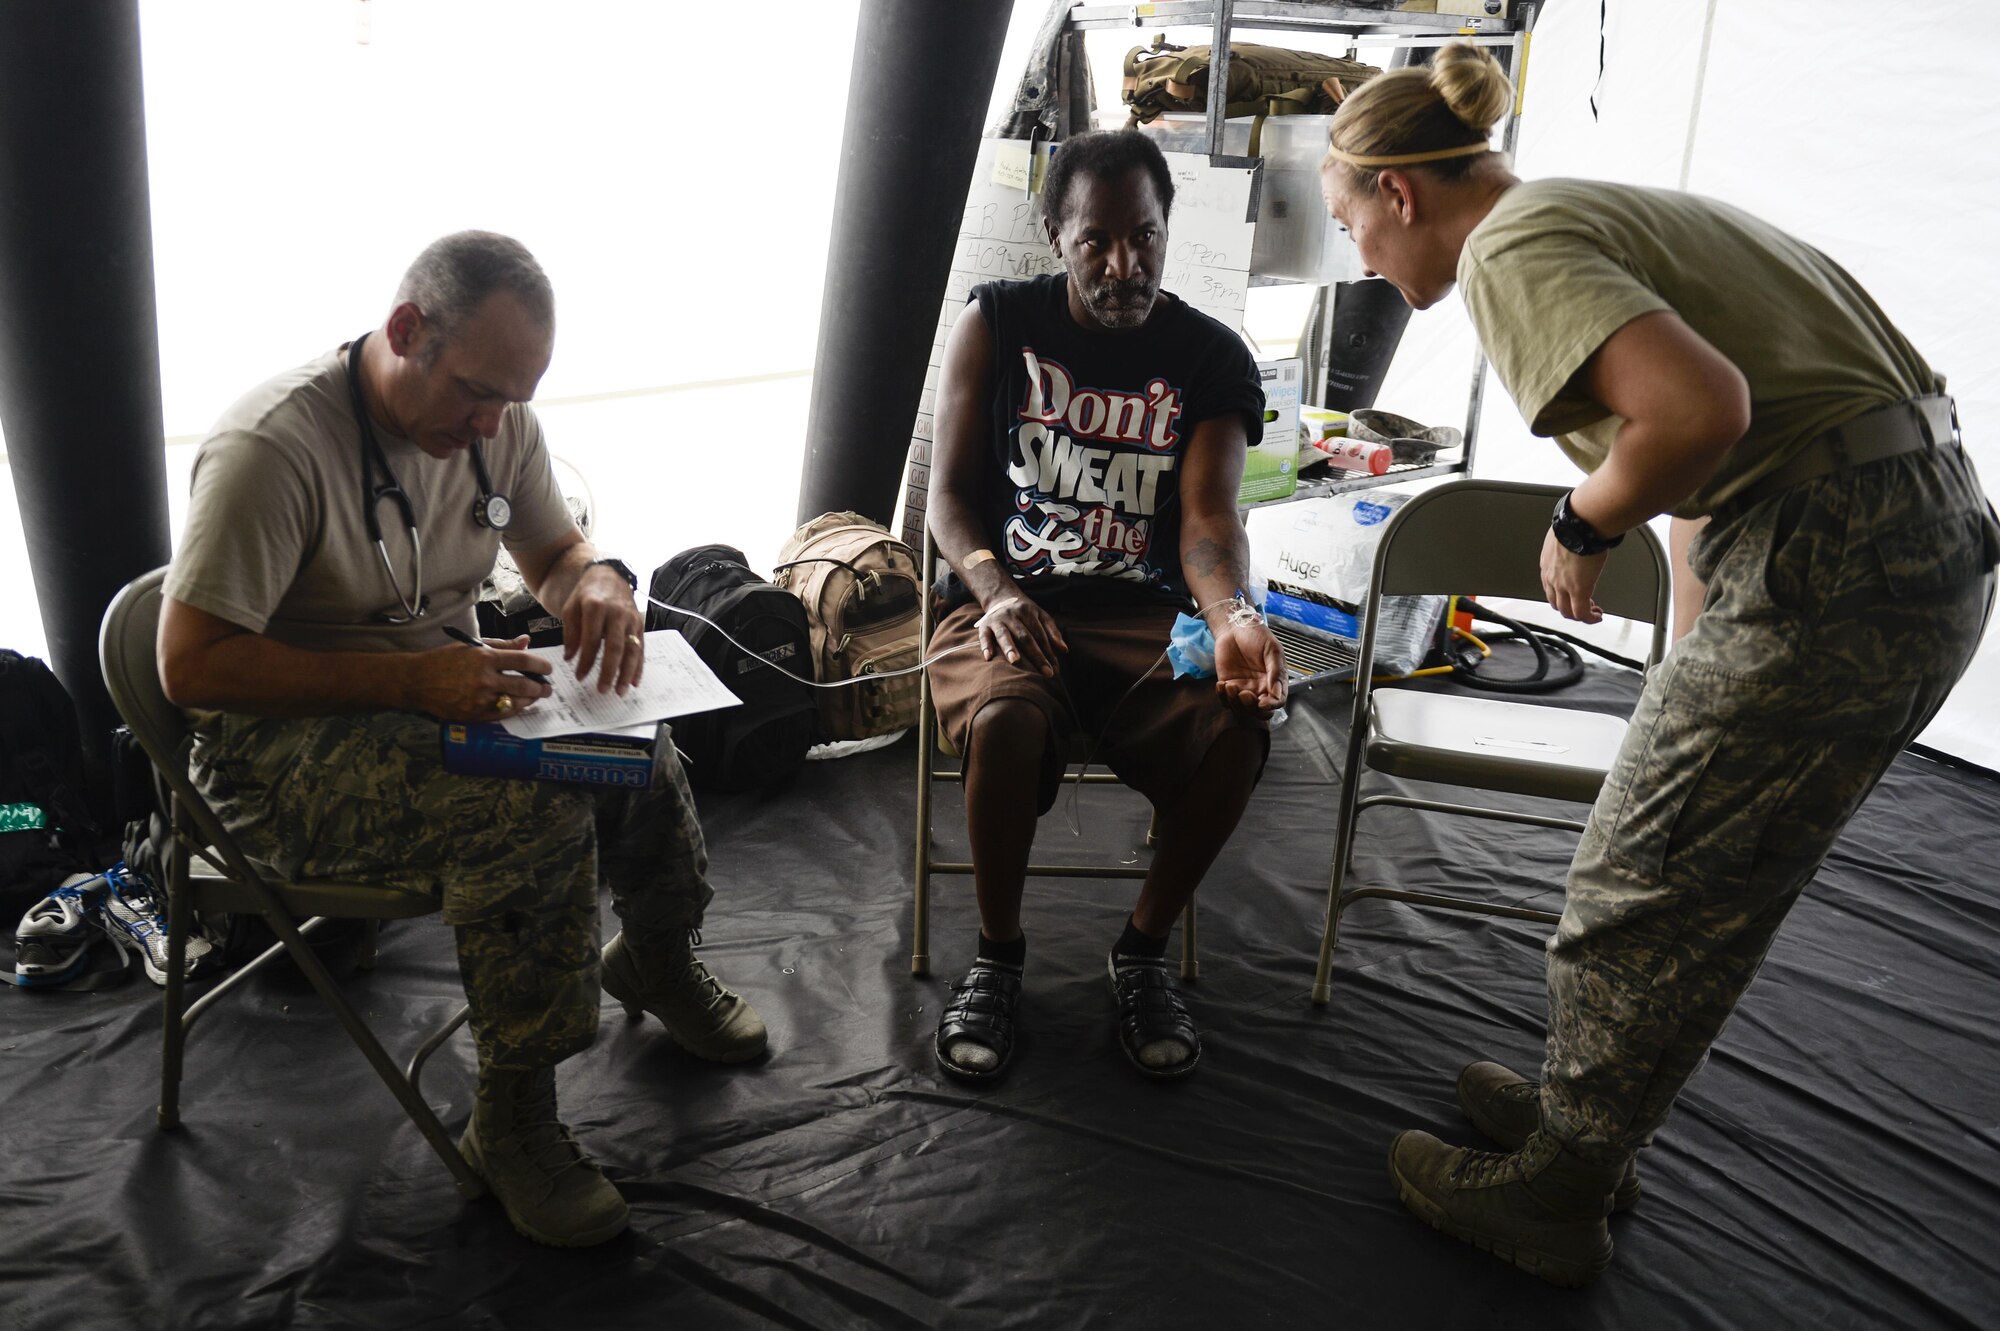 A patient receives care at a field hospital from Capt. Jerrod Taber, a physician's assistant, and Senior Airman Micah Battistoni, a medical technician, with the 149th Medical Group, Joint Base San Antonio, Texas, Sept. 3, 2017. The field hospital set-up in the parking lot of the Baptist Hospitals  of Southeast Texas as the hospital was only taking medical emergencies due to damage caused by Hurricane Harvey. (U.S. Air Force photo by Master Sgt. Joshua L. DeMotts)